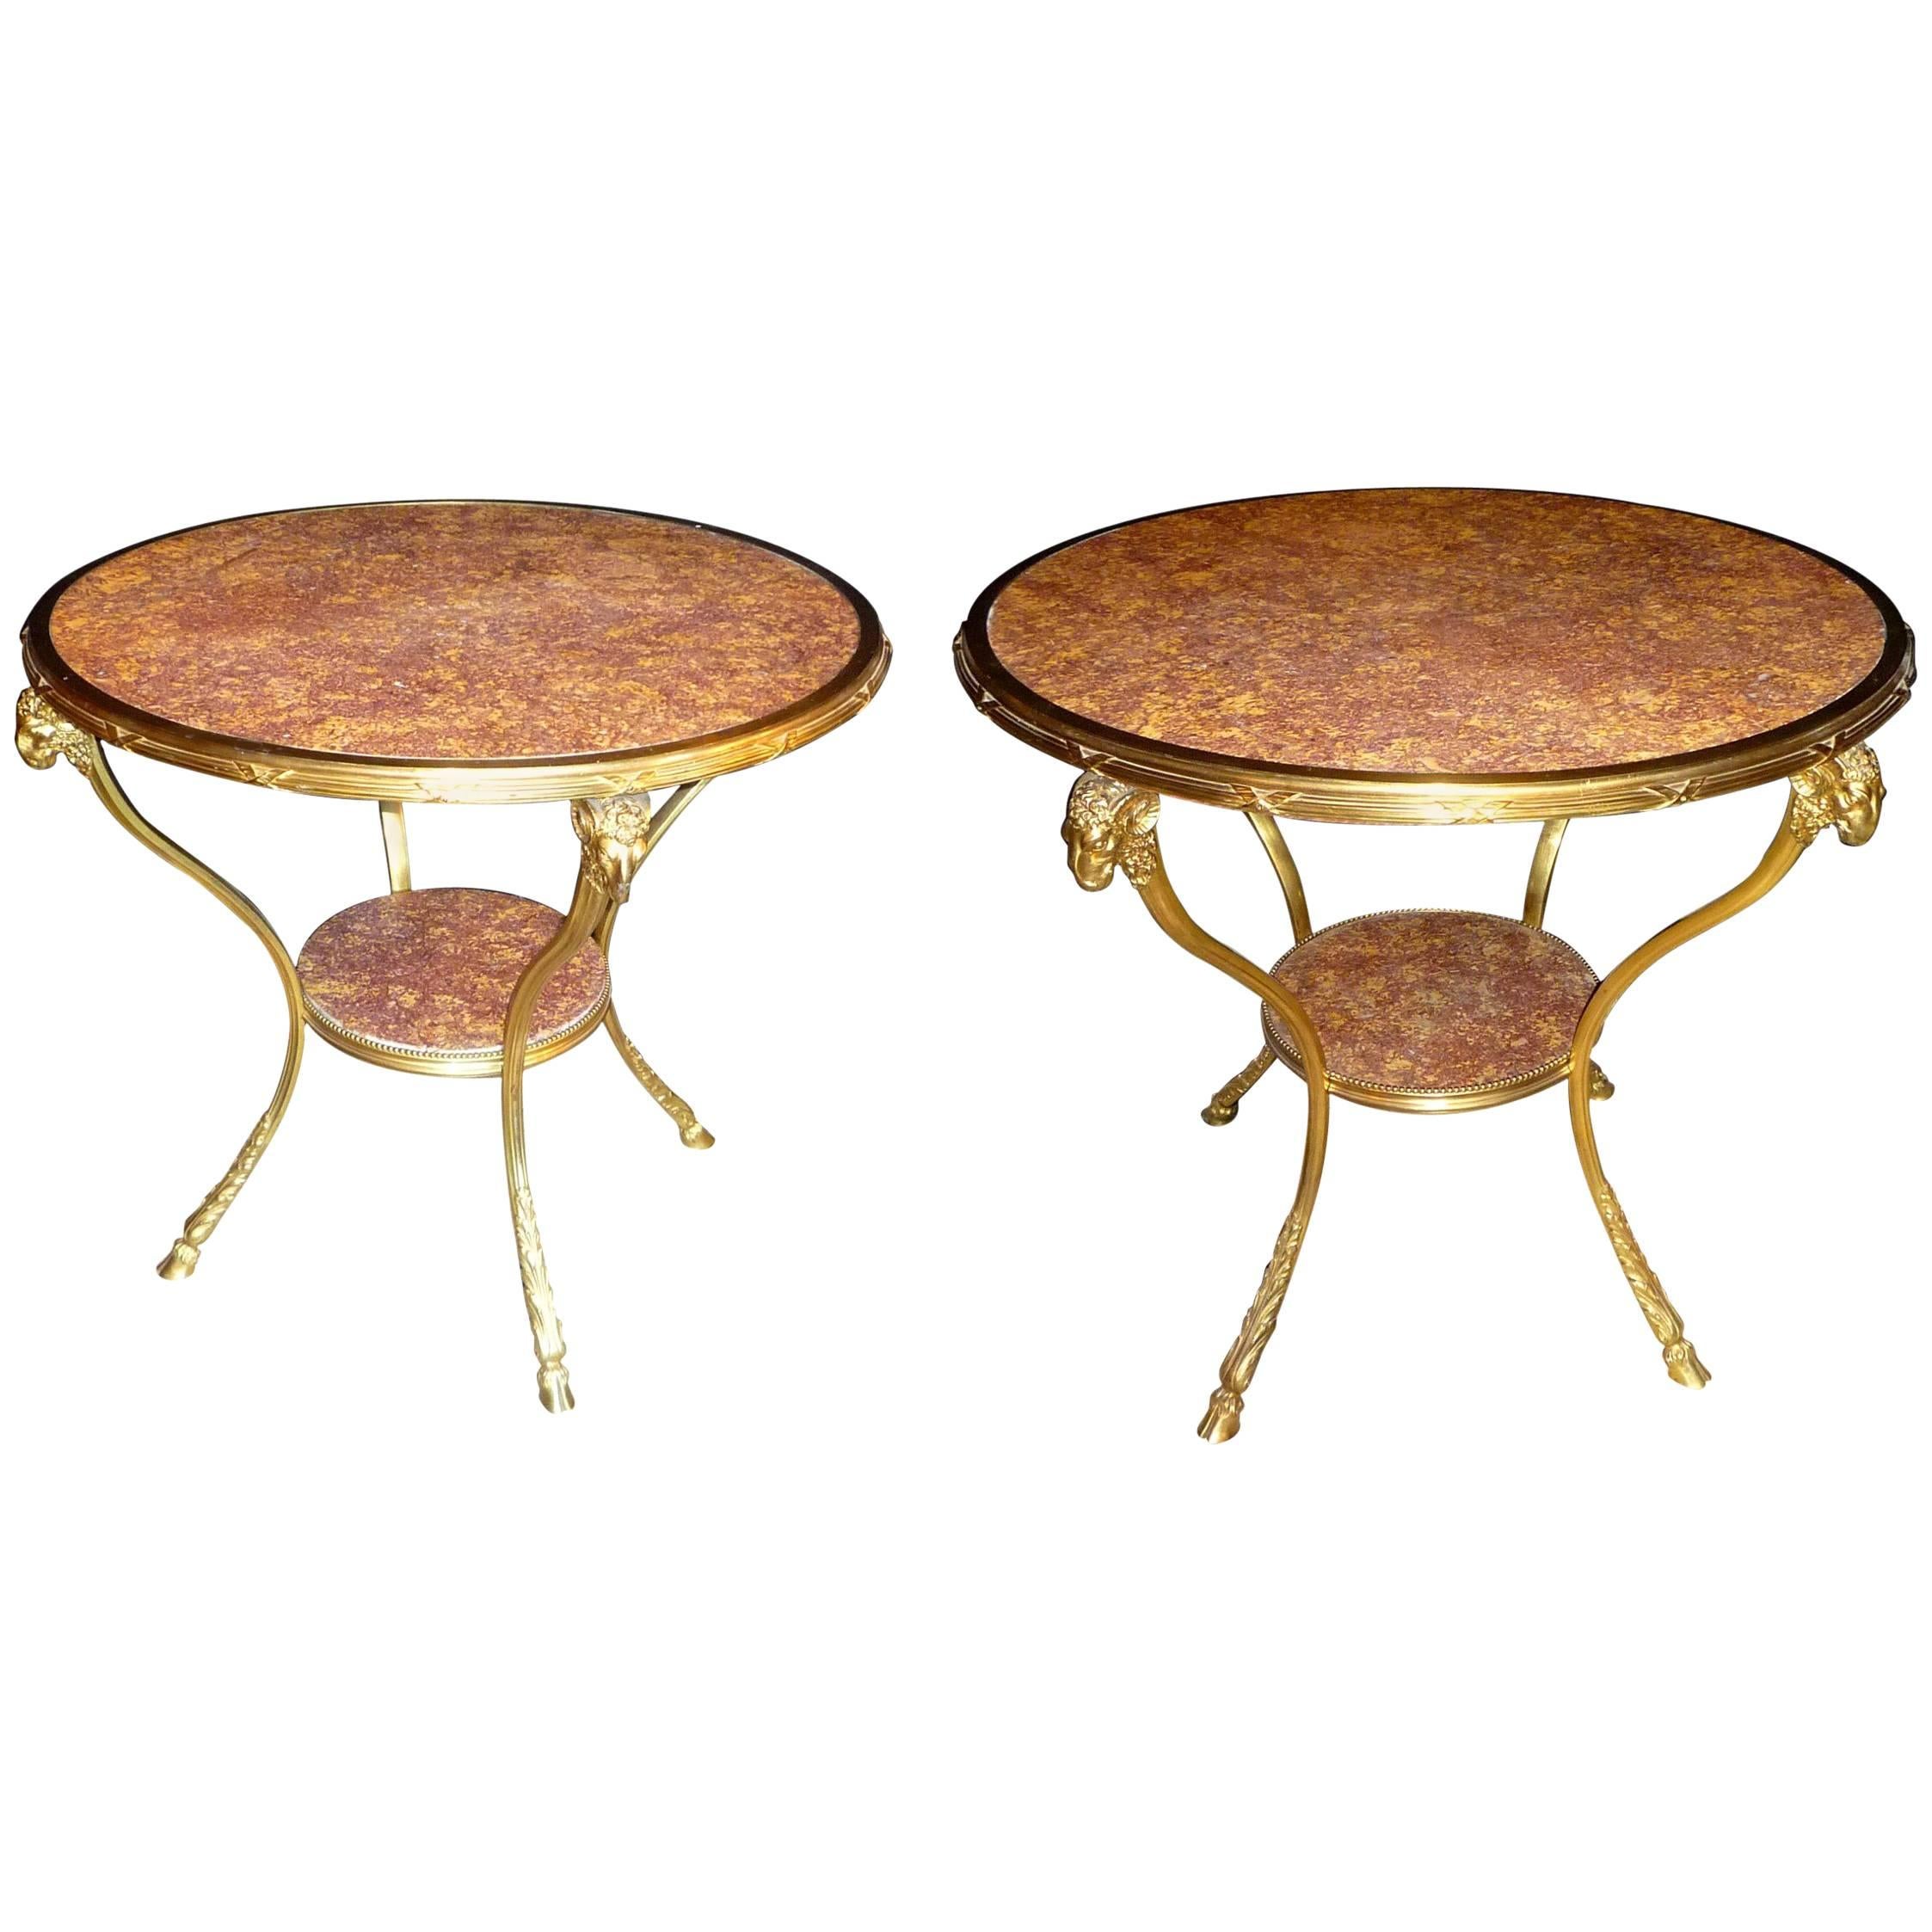 Pair of French Louis XVI Style Gilt Bronze and Marble Tops Gueridons, circa 1880